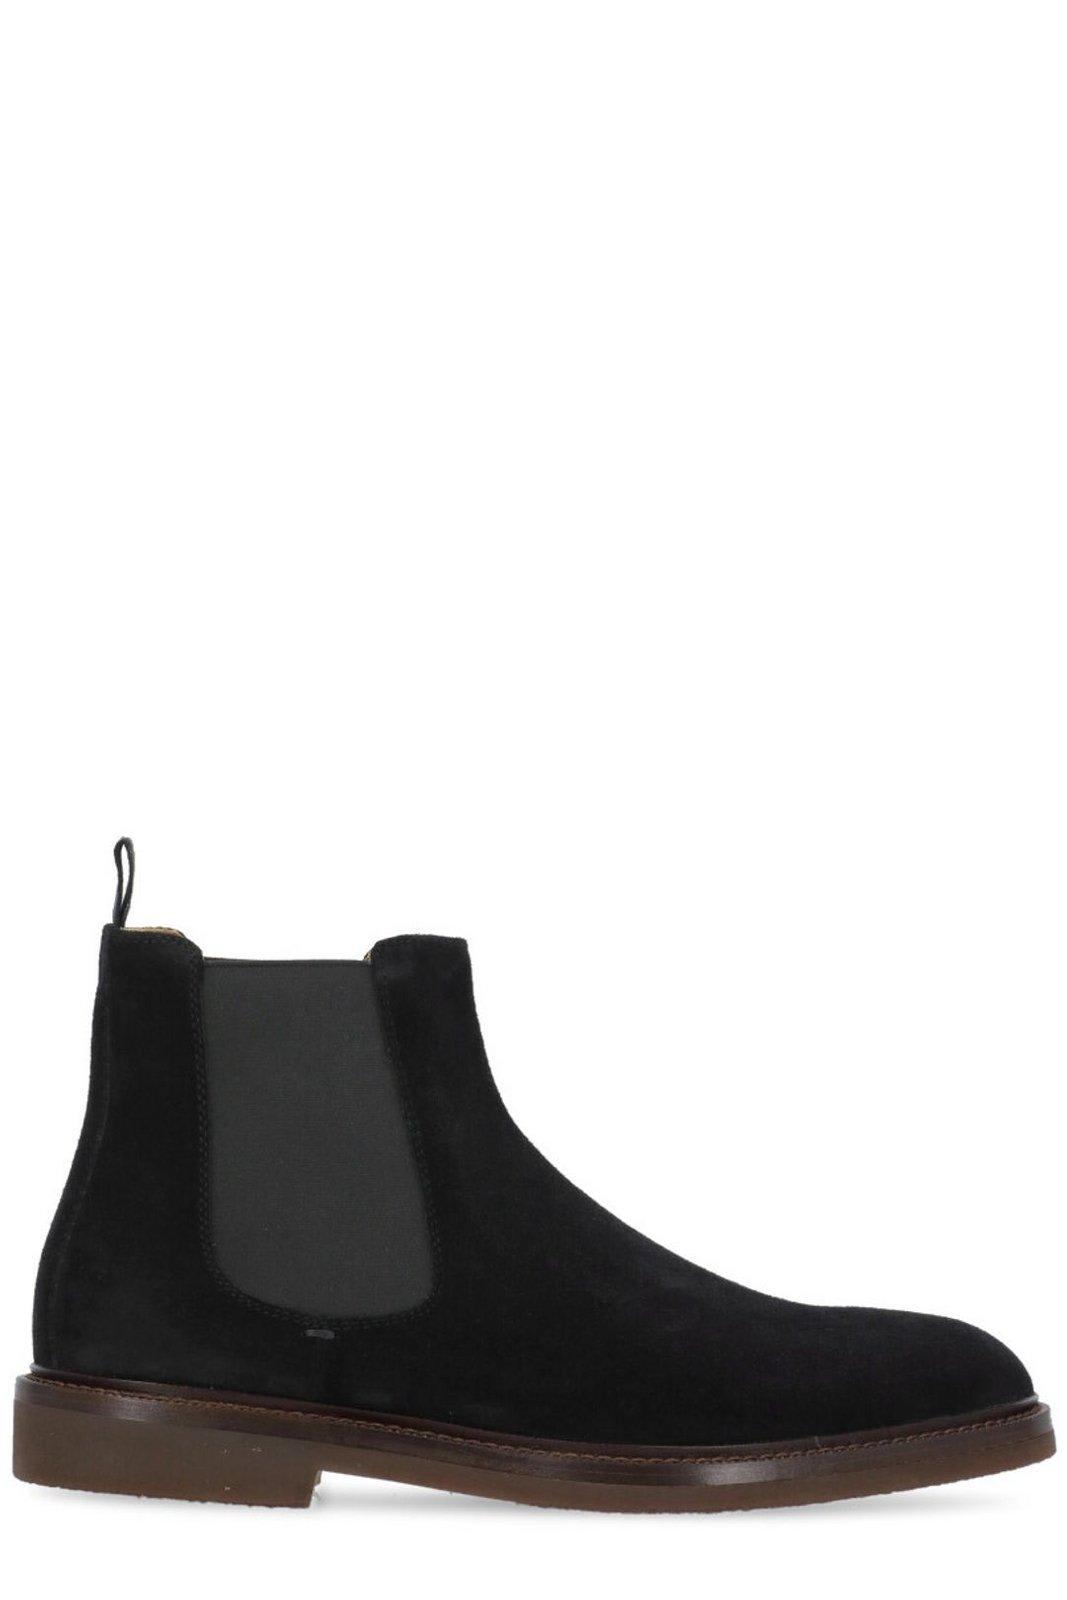 Brunello Cucinelli Elasticated-Panel Chelsea Ankle Boots